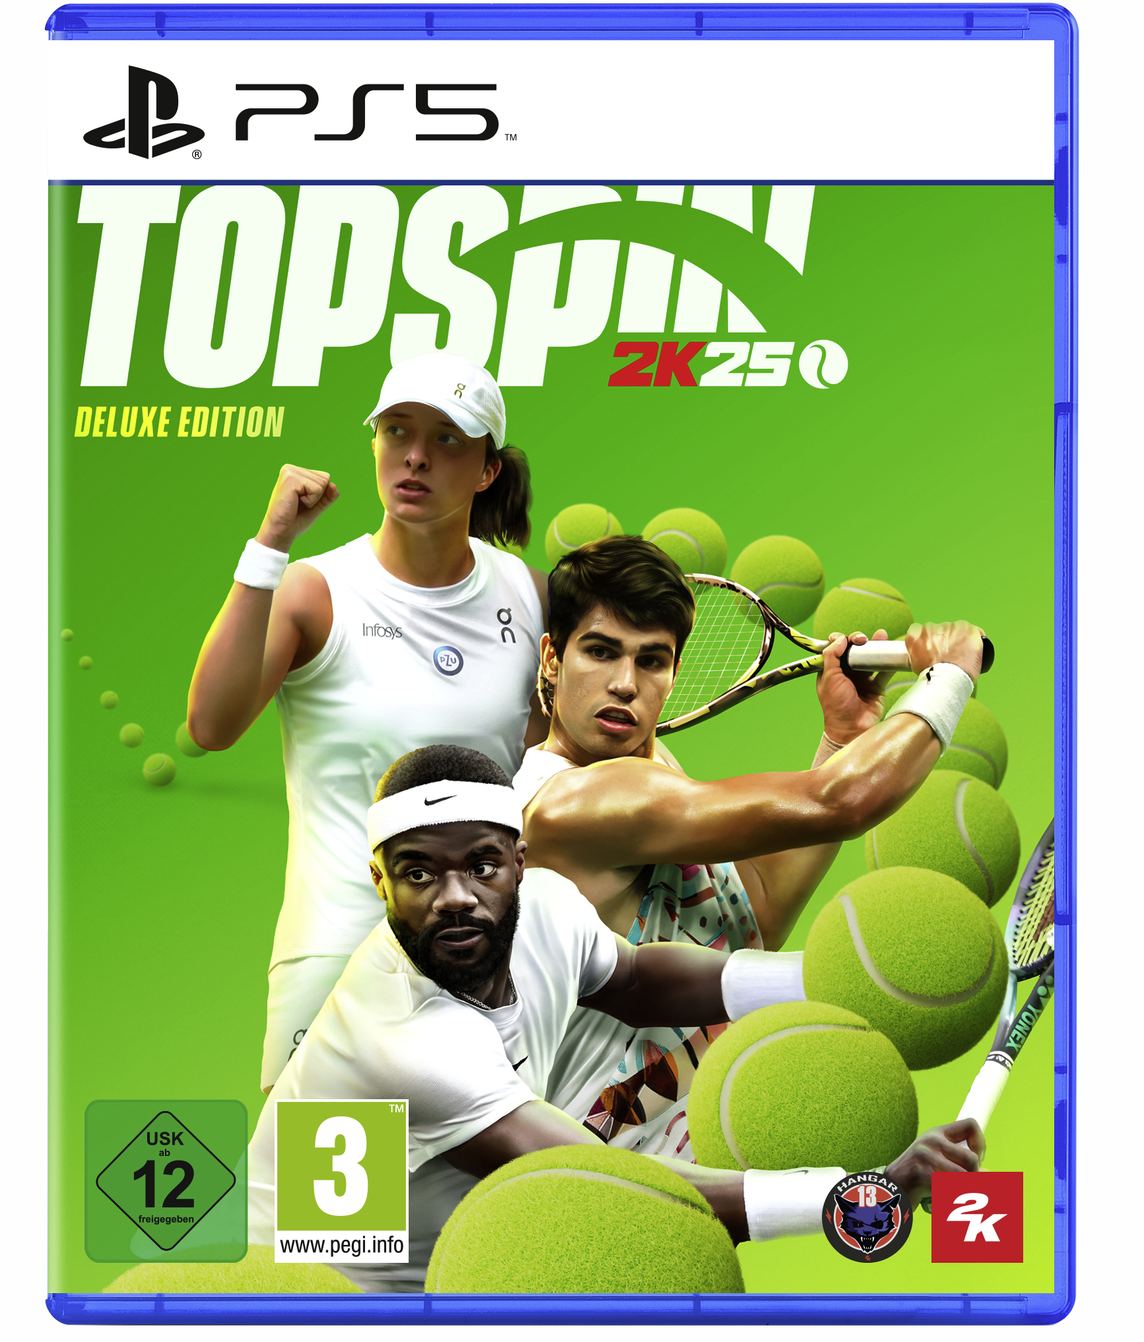 PS5 TOP SPIN 2K25 DELUXE (USK & PEGI) - [PlayStation 5] für 59,99€ in Saturn